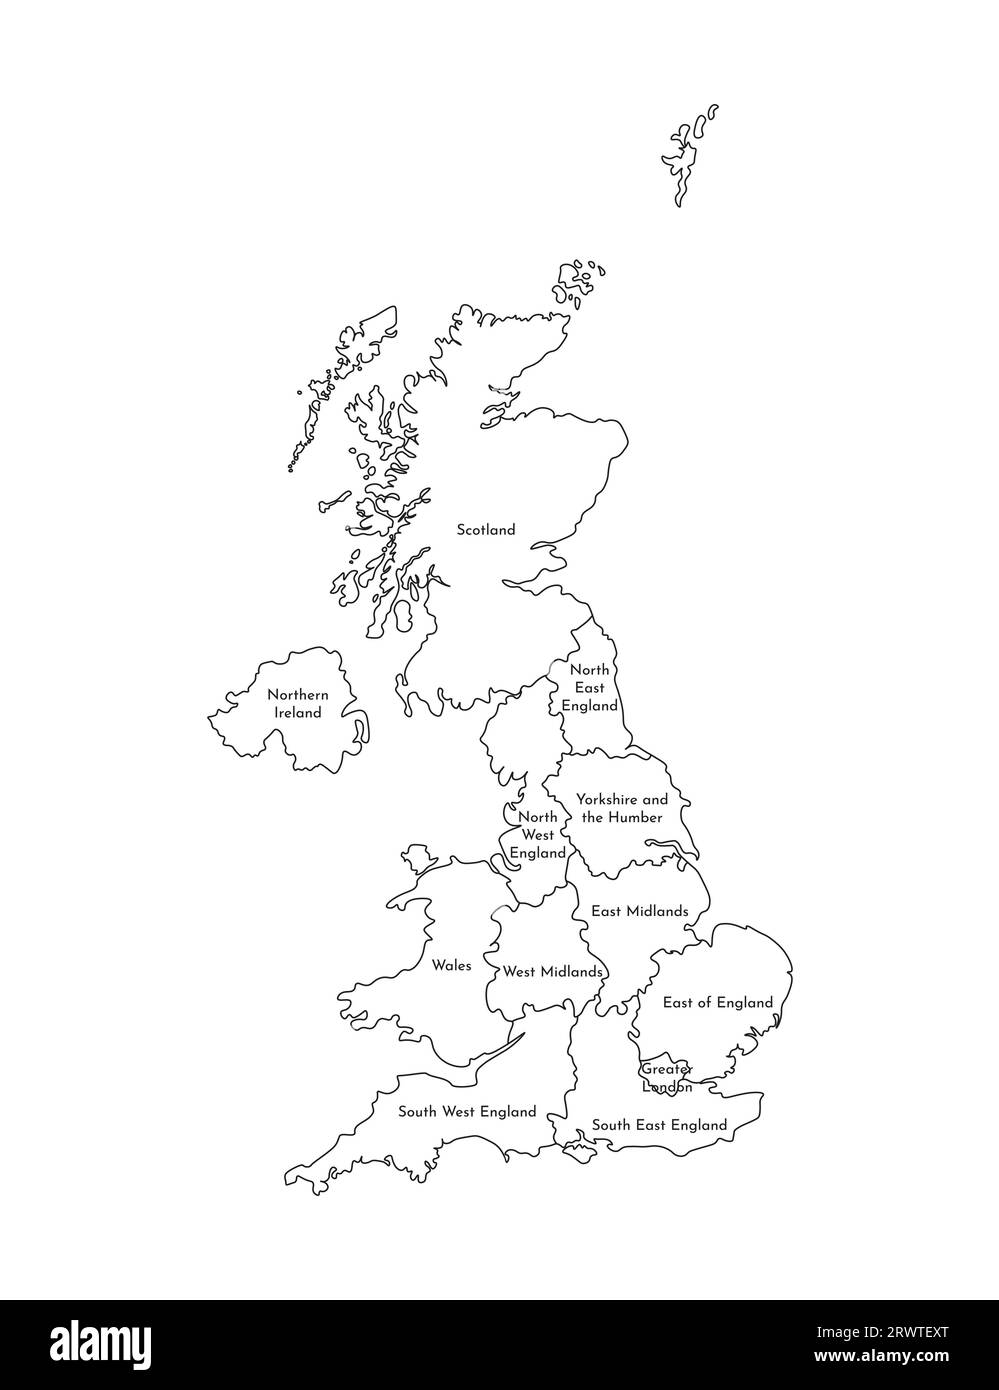 Vector isolated illustration of simplified administrative map of the United Kingdom of Great Britain and Northern Ireland. Borders and names of the re Stock Vector